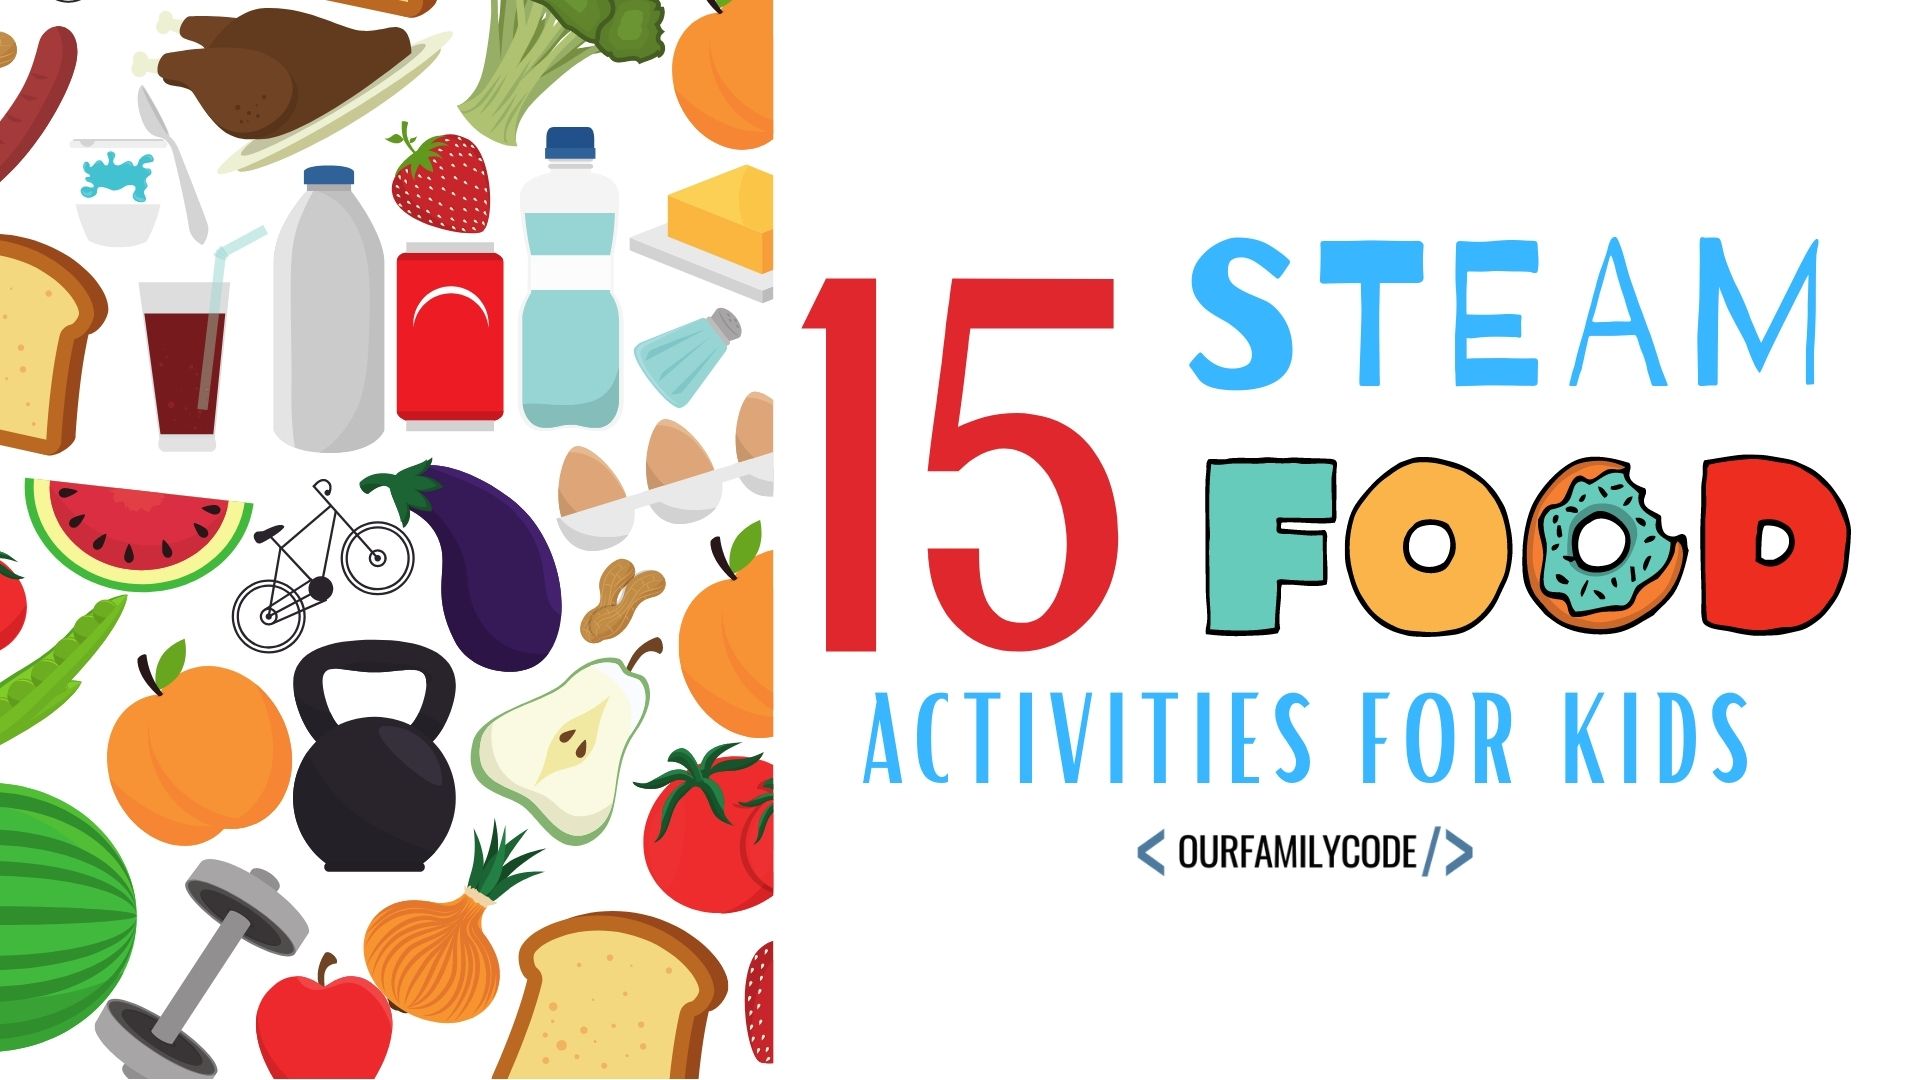 A picture of 15 steam food activities for kids written on white with food icons in background.